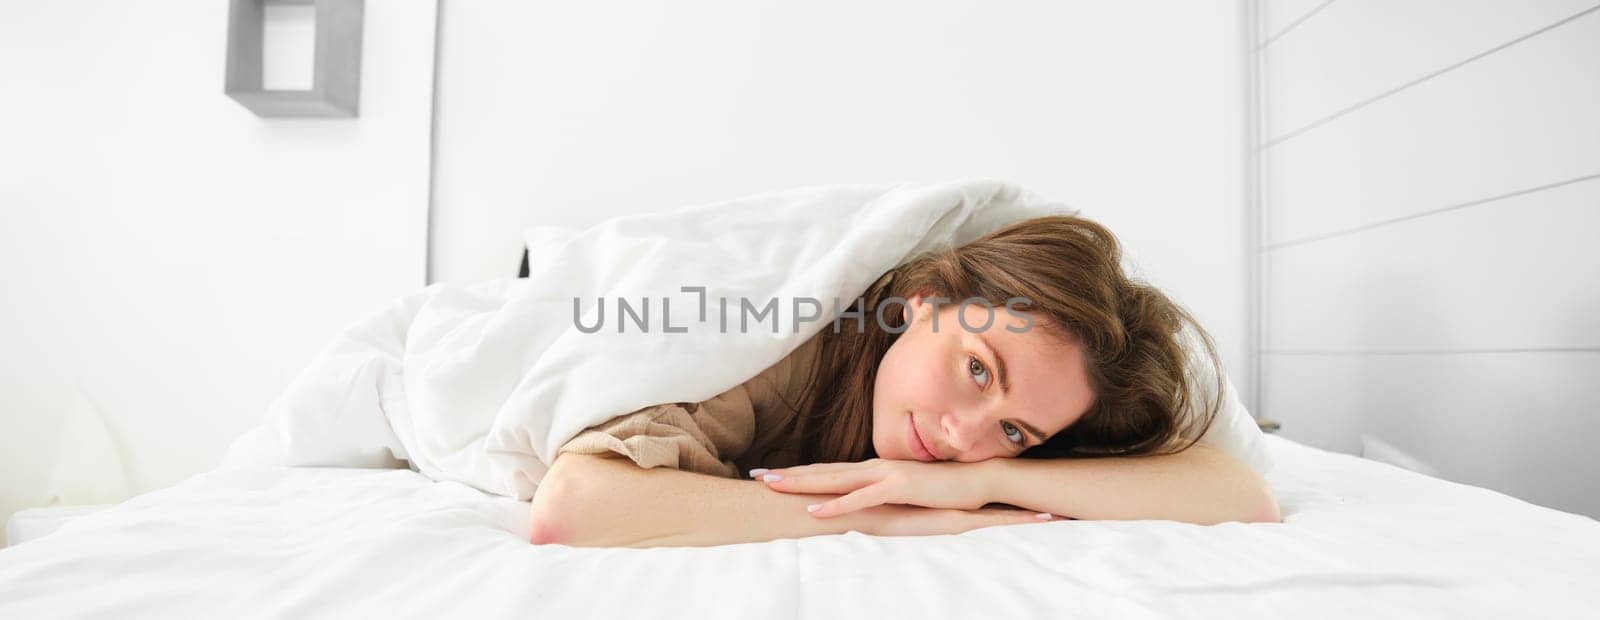 Beautiful young woman, lying in her bed under blanket, looking at camera with romantic, calm smiling face.